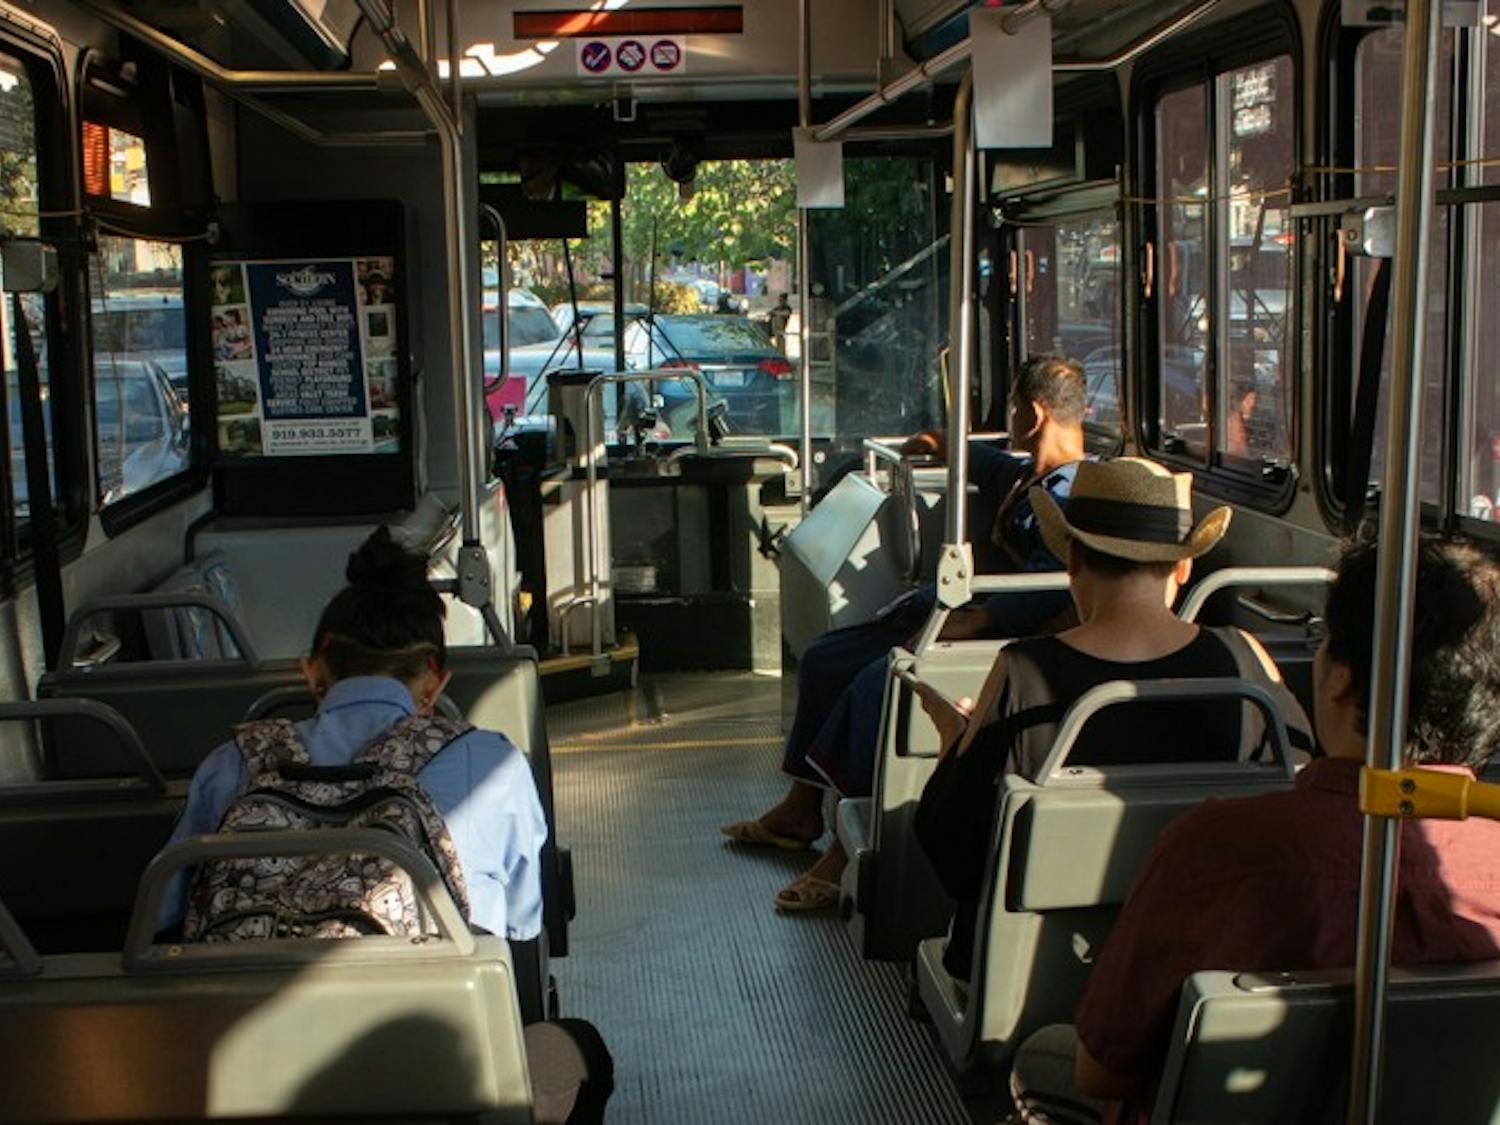 Passengers wait in traffic on the CW Bus during Public Transportation Week on Monday, Sept. 23, 2019. The city of Carrboro kicked off Public Transportation Week to encourage its citizens to learn the bus routes available to them.